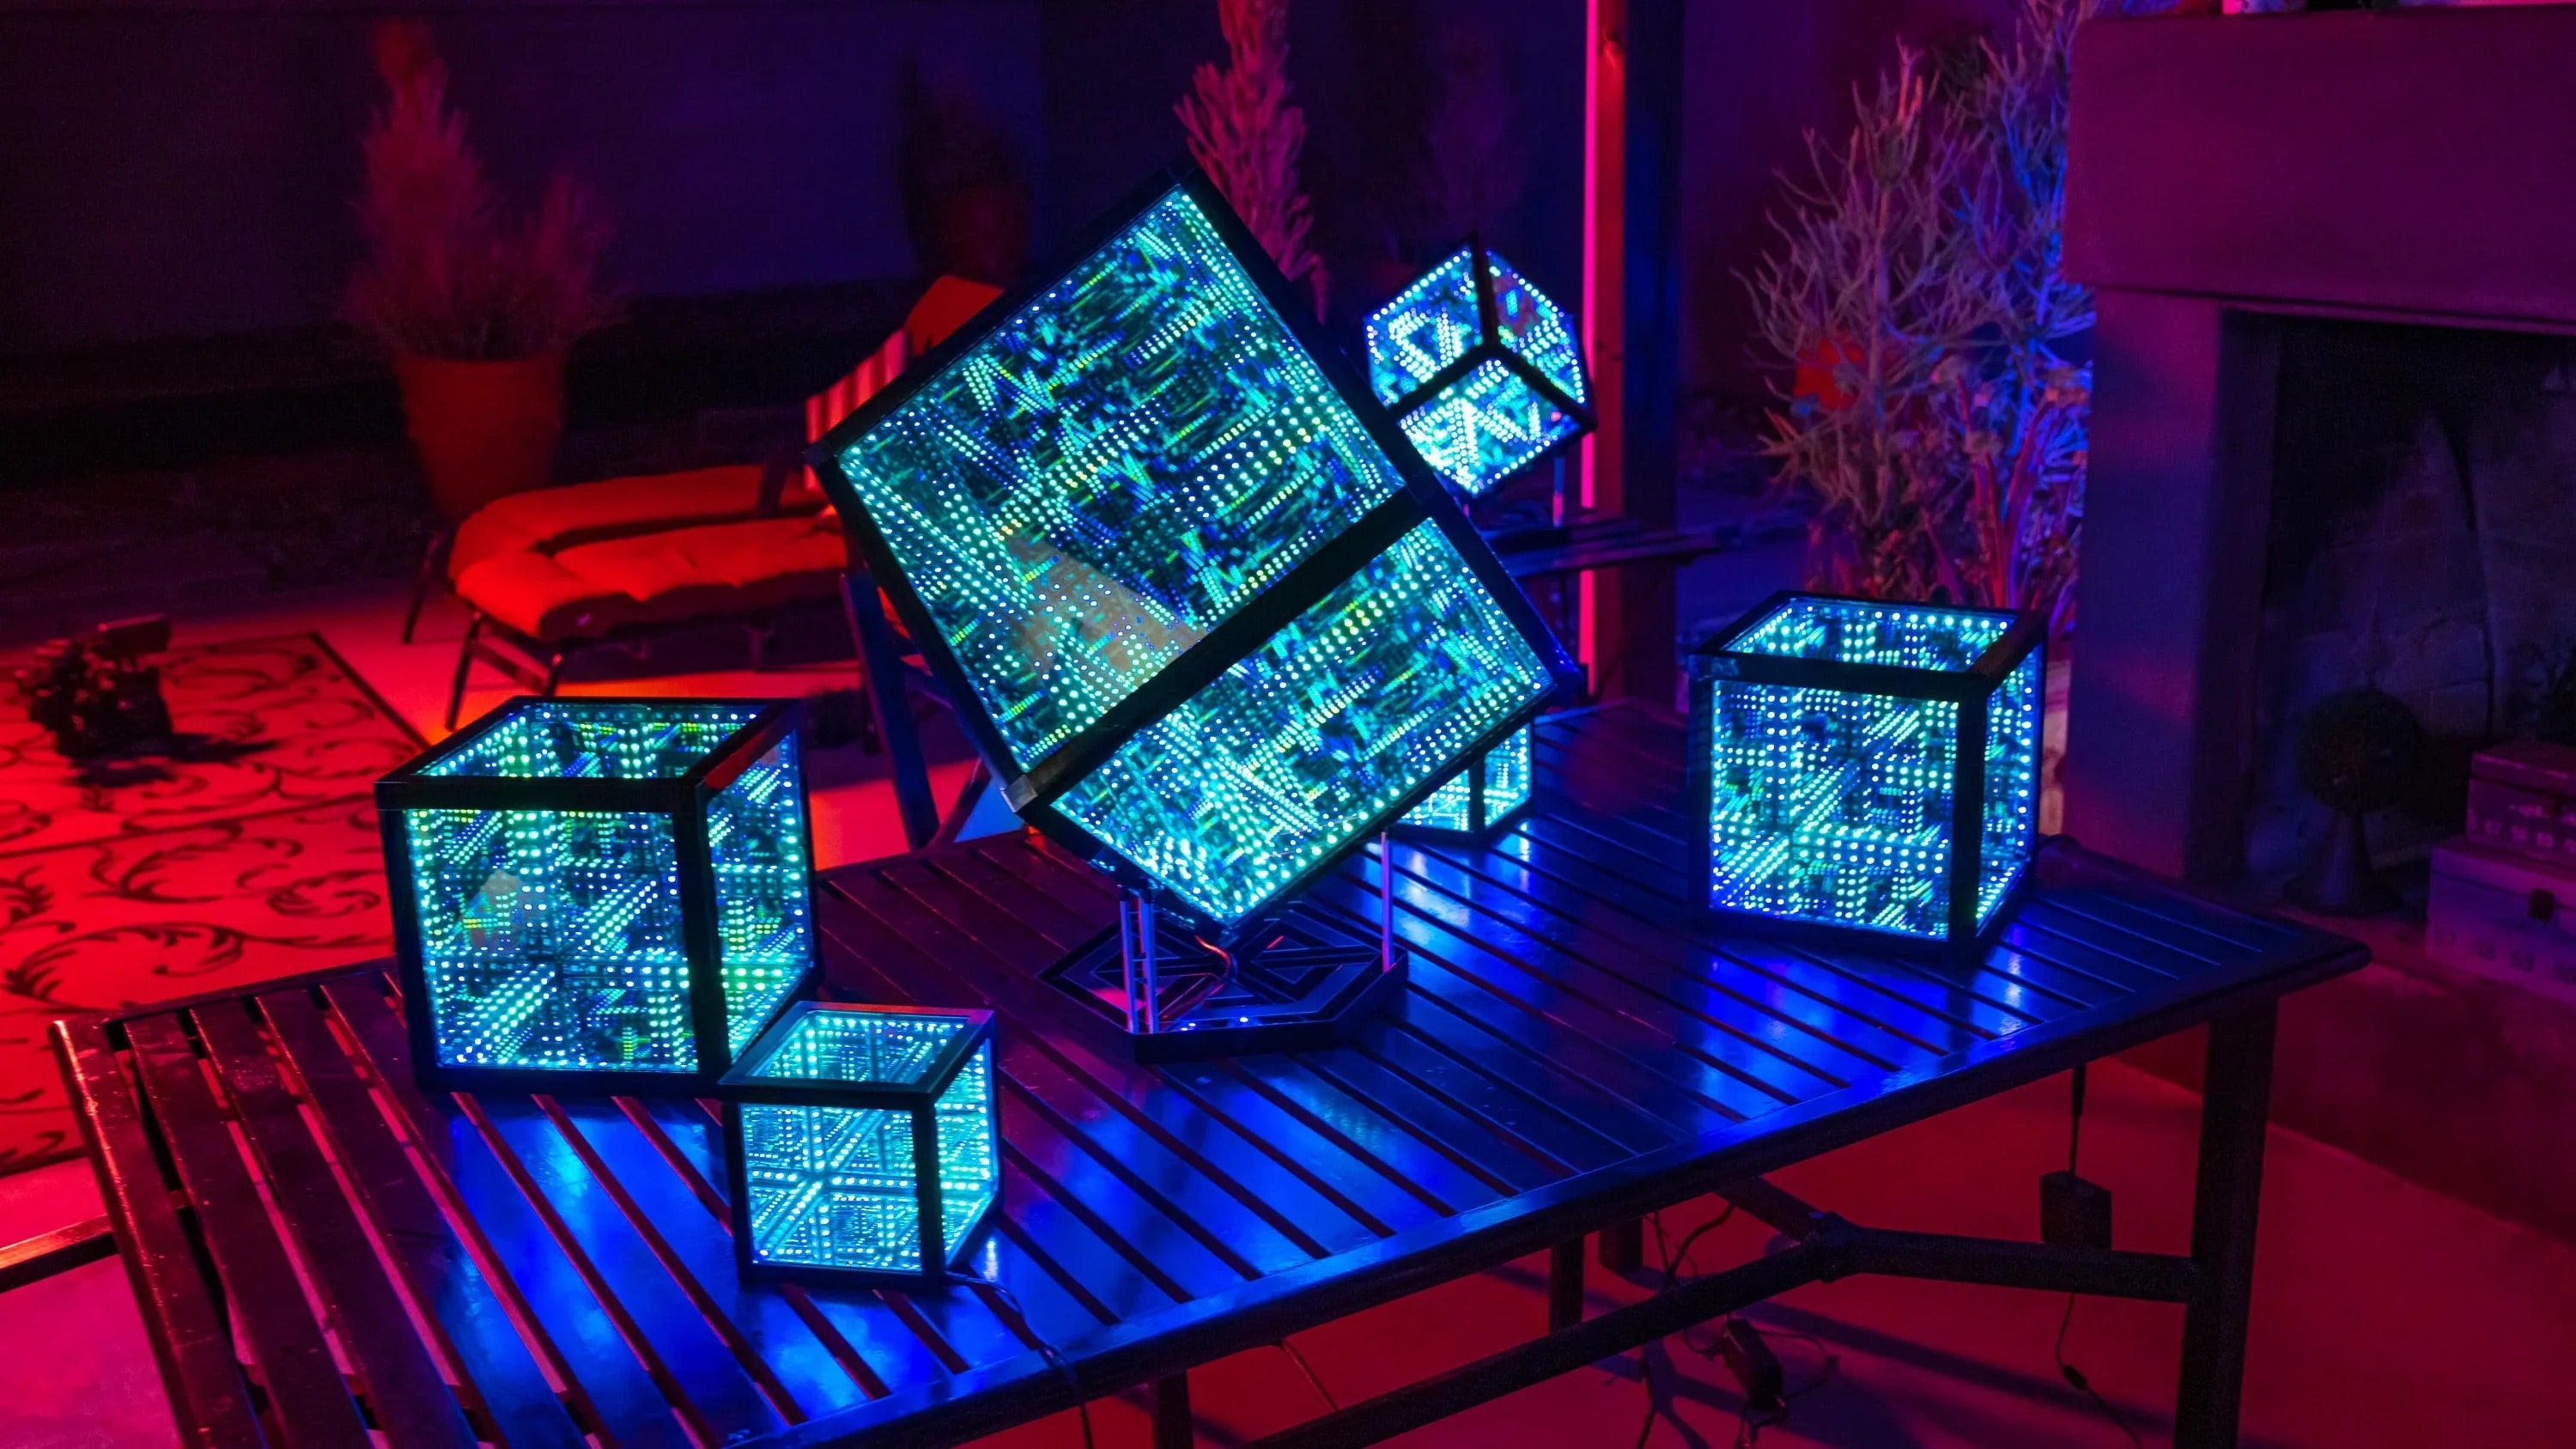 Five cubes placed on patio table for hi-tech decor to liven up home for party 